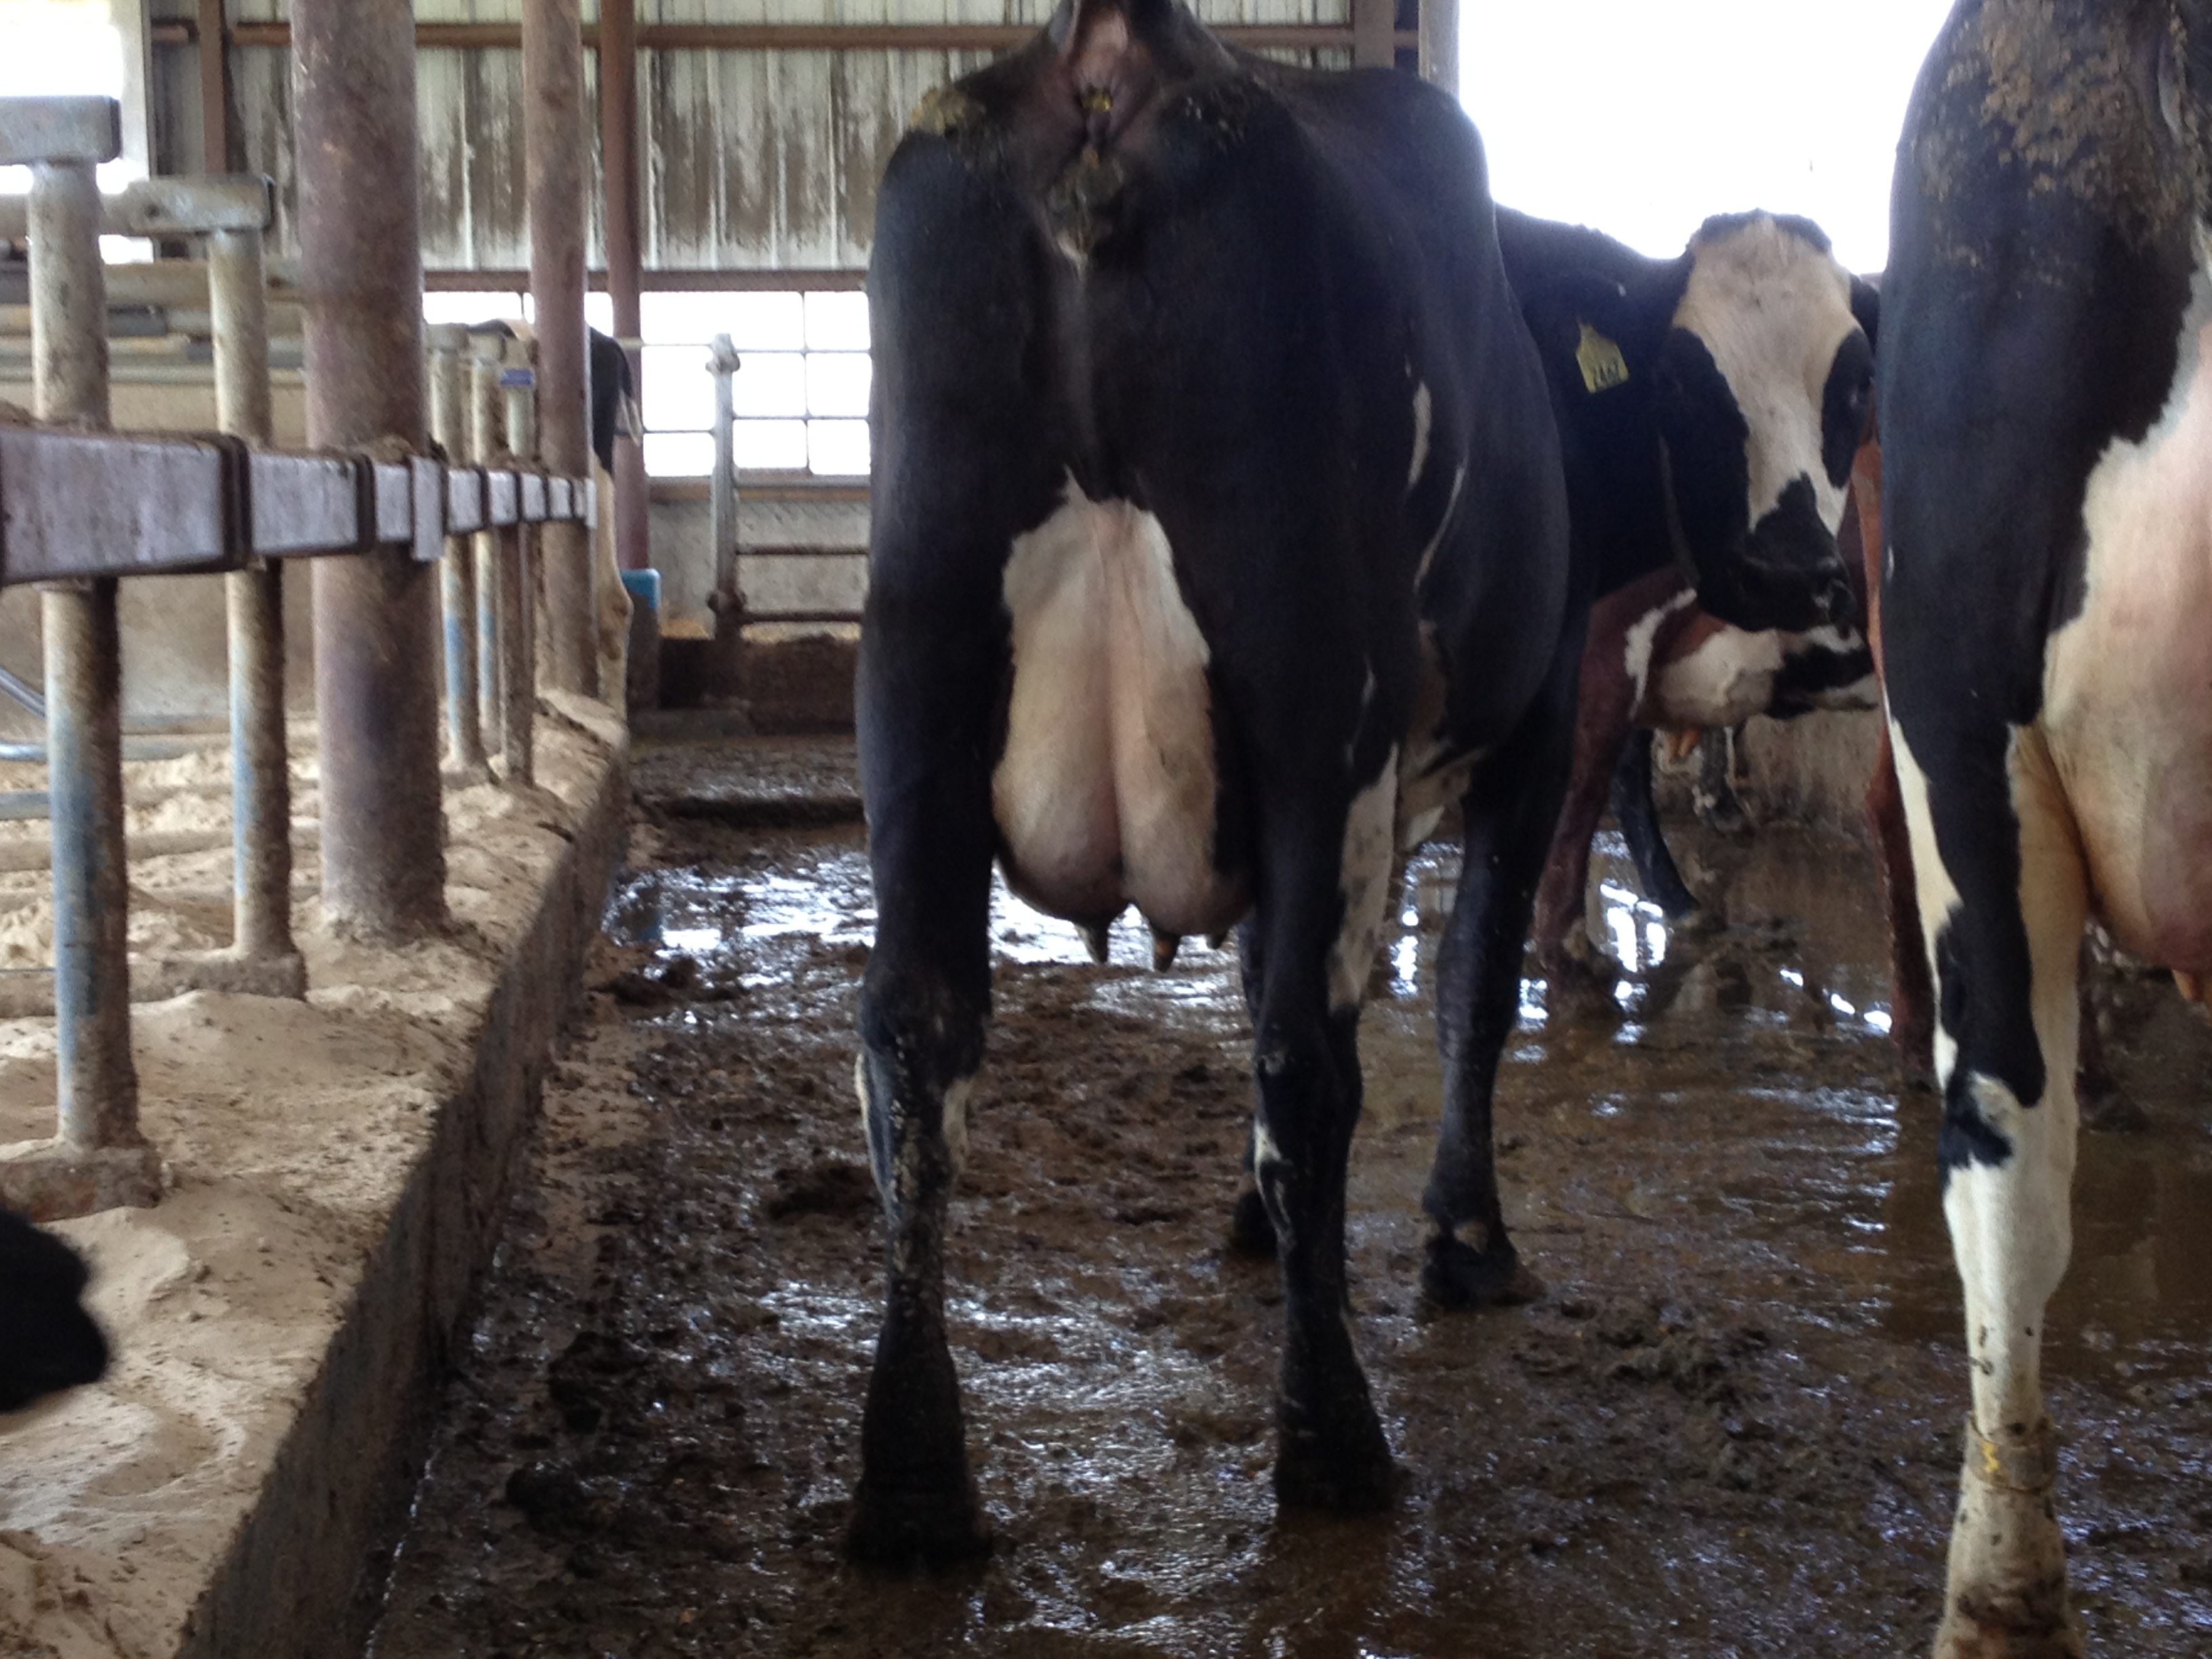 Tested @ 19 days in milk, 102 lbs/day, 3.3% fat 3.1% protein. She's normally at 4.0% fat and 3.5% protein.